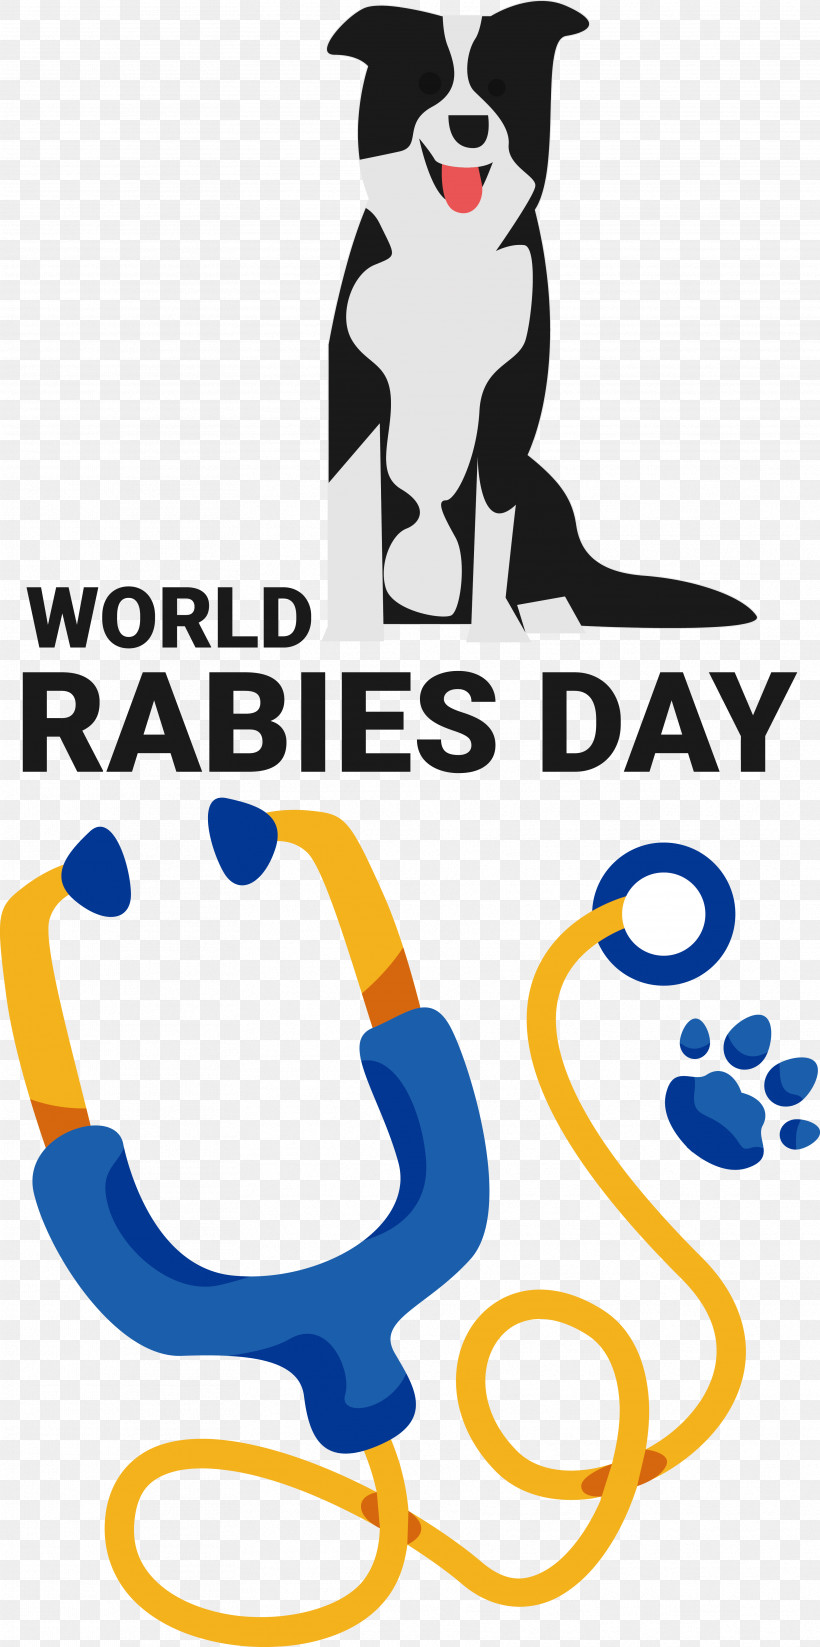 World Rabies Day Dog Health Rabies Control, PNG, 3536x7106px, World Rabies Day, Dog, Health, Rabies Control Download Free